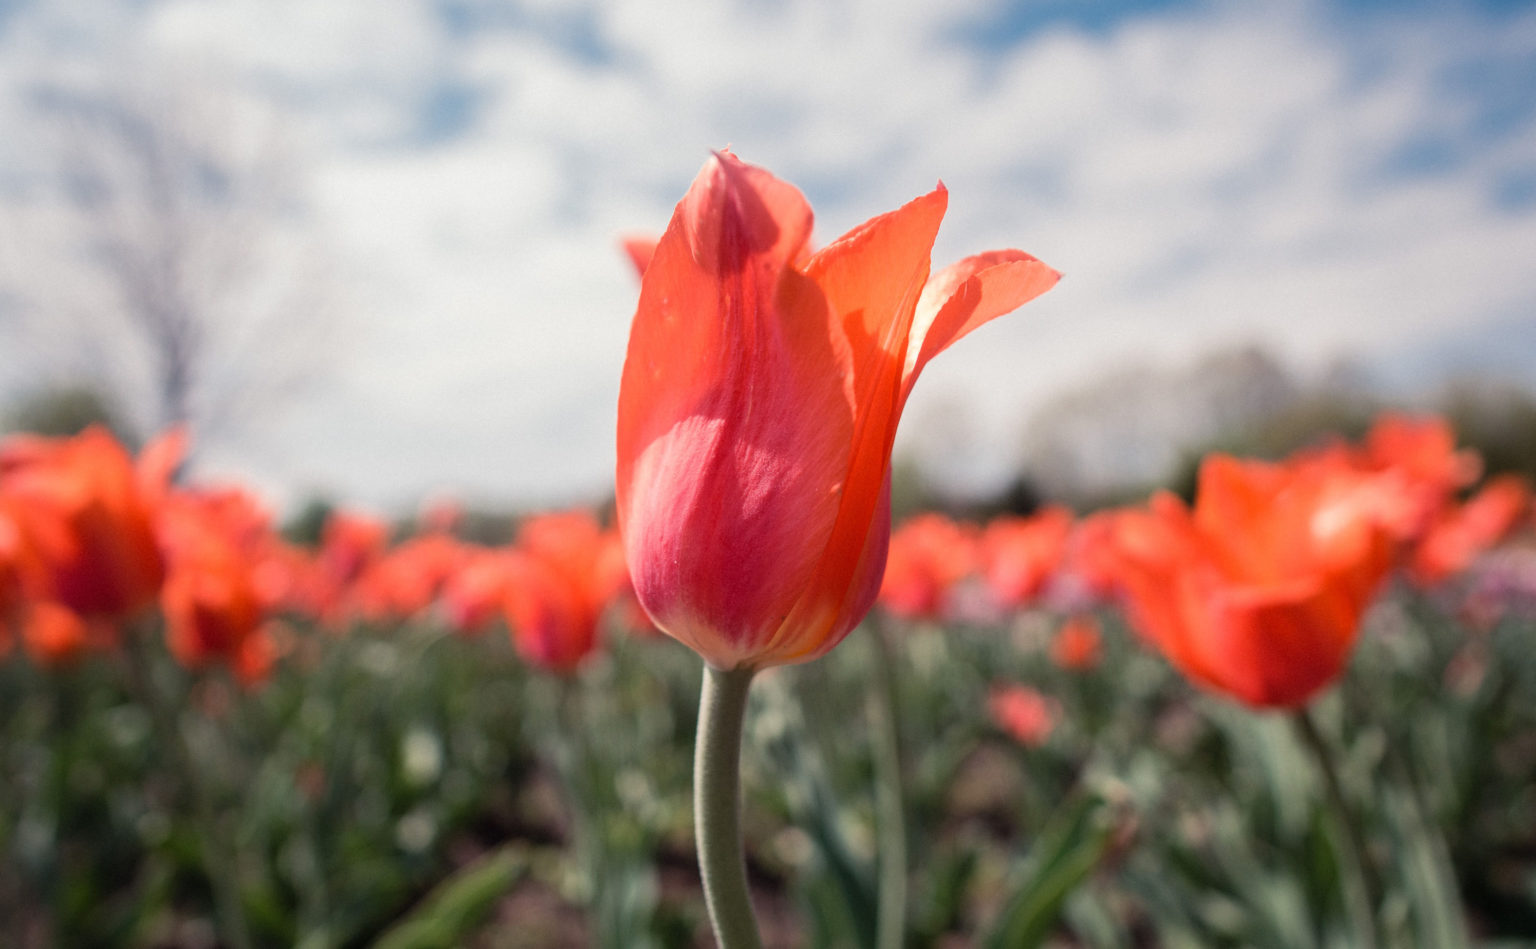 Red tulip amidst a tulip field in the Netherlands